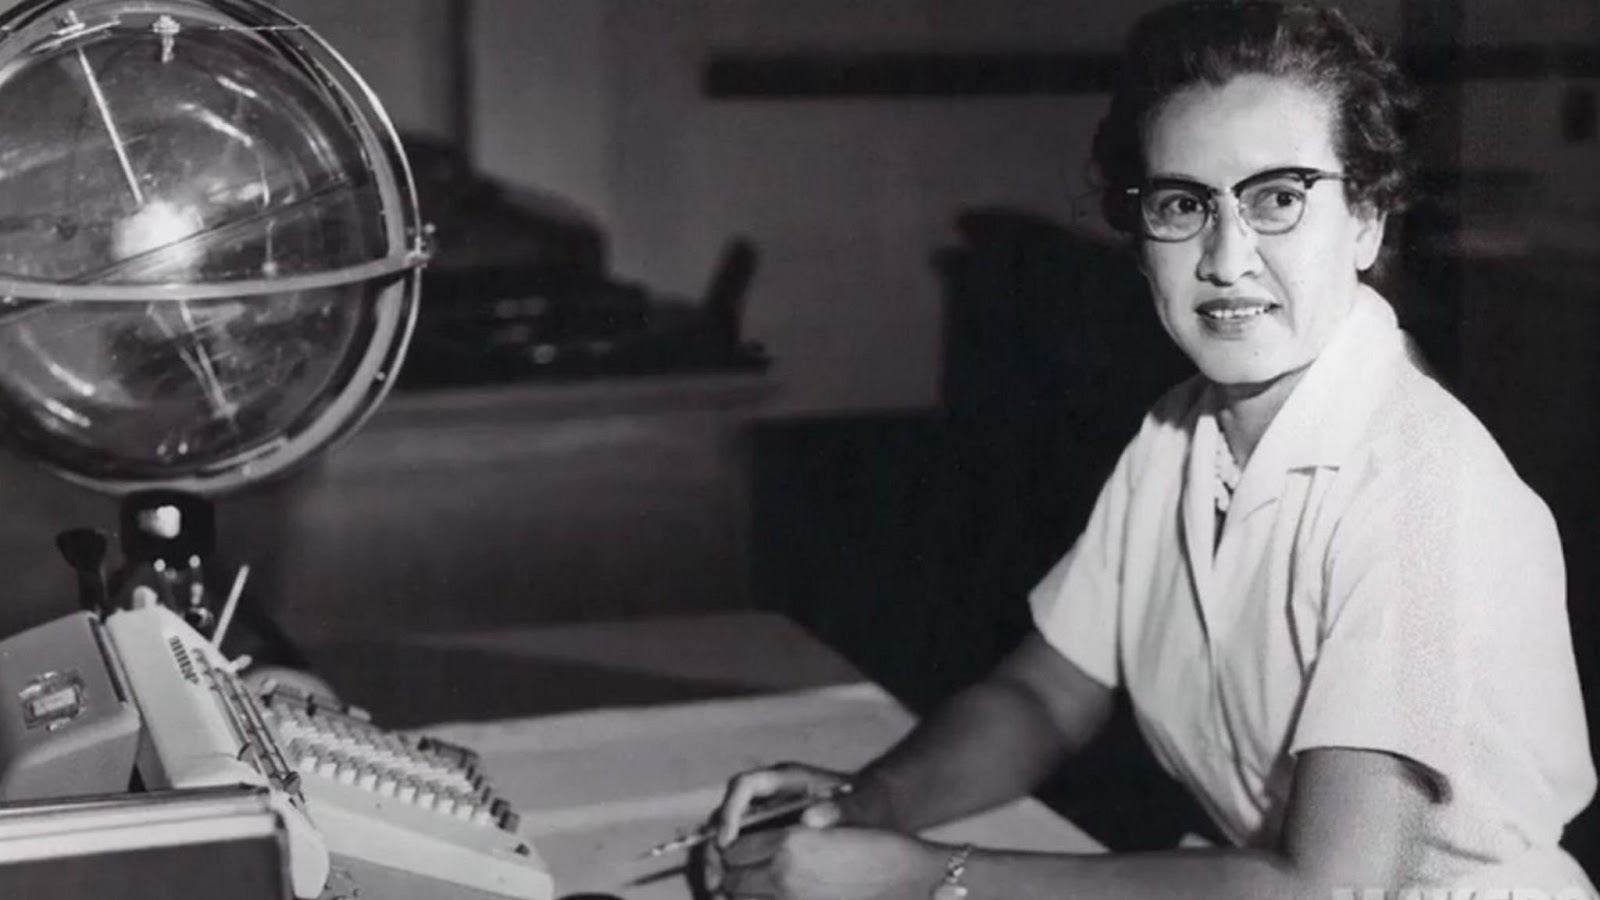 Black and white portrait of Katherine Johnson sitting at a desk with a white short sleeve polo and cat eyed glasses, smiling towards the camera. There is a computer and a glass globe-like instrument in front of her.